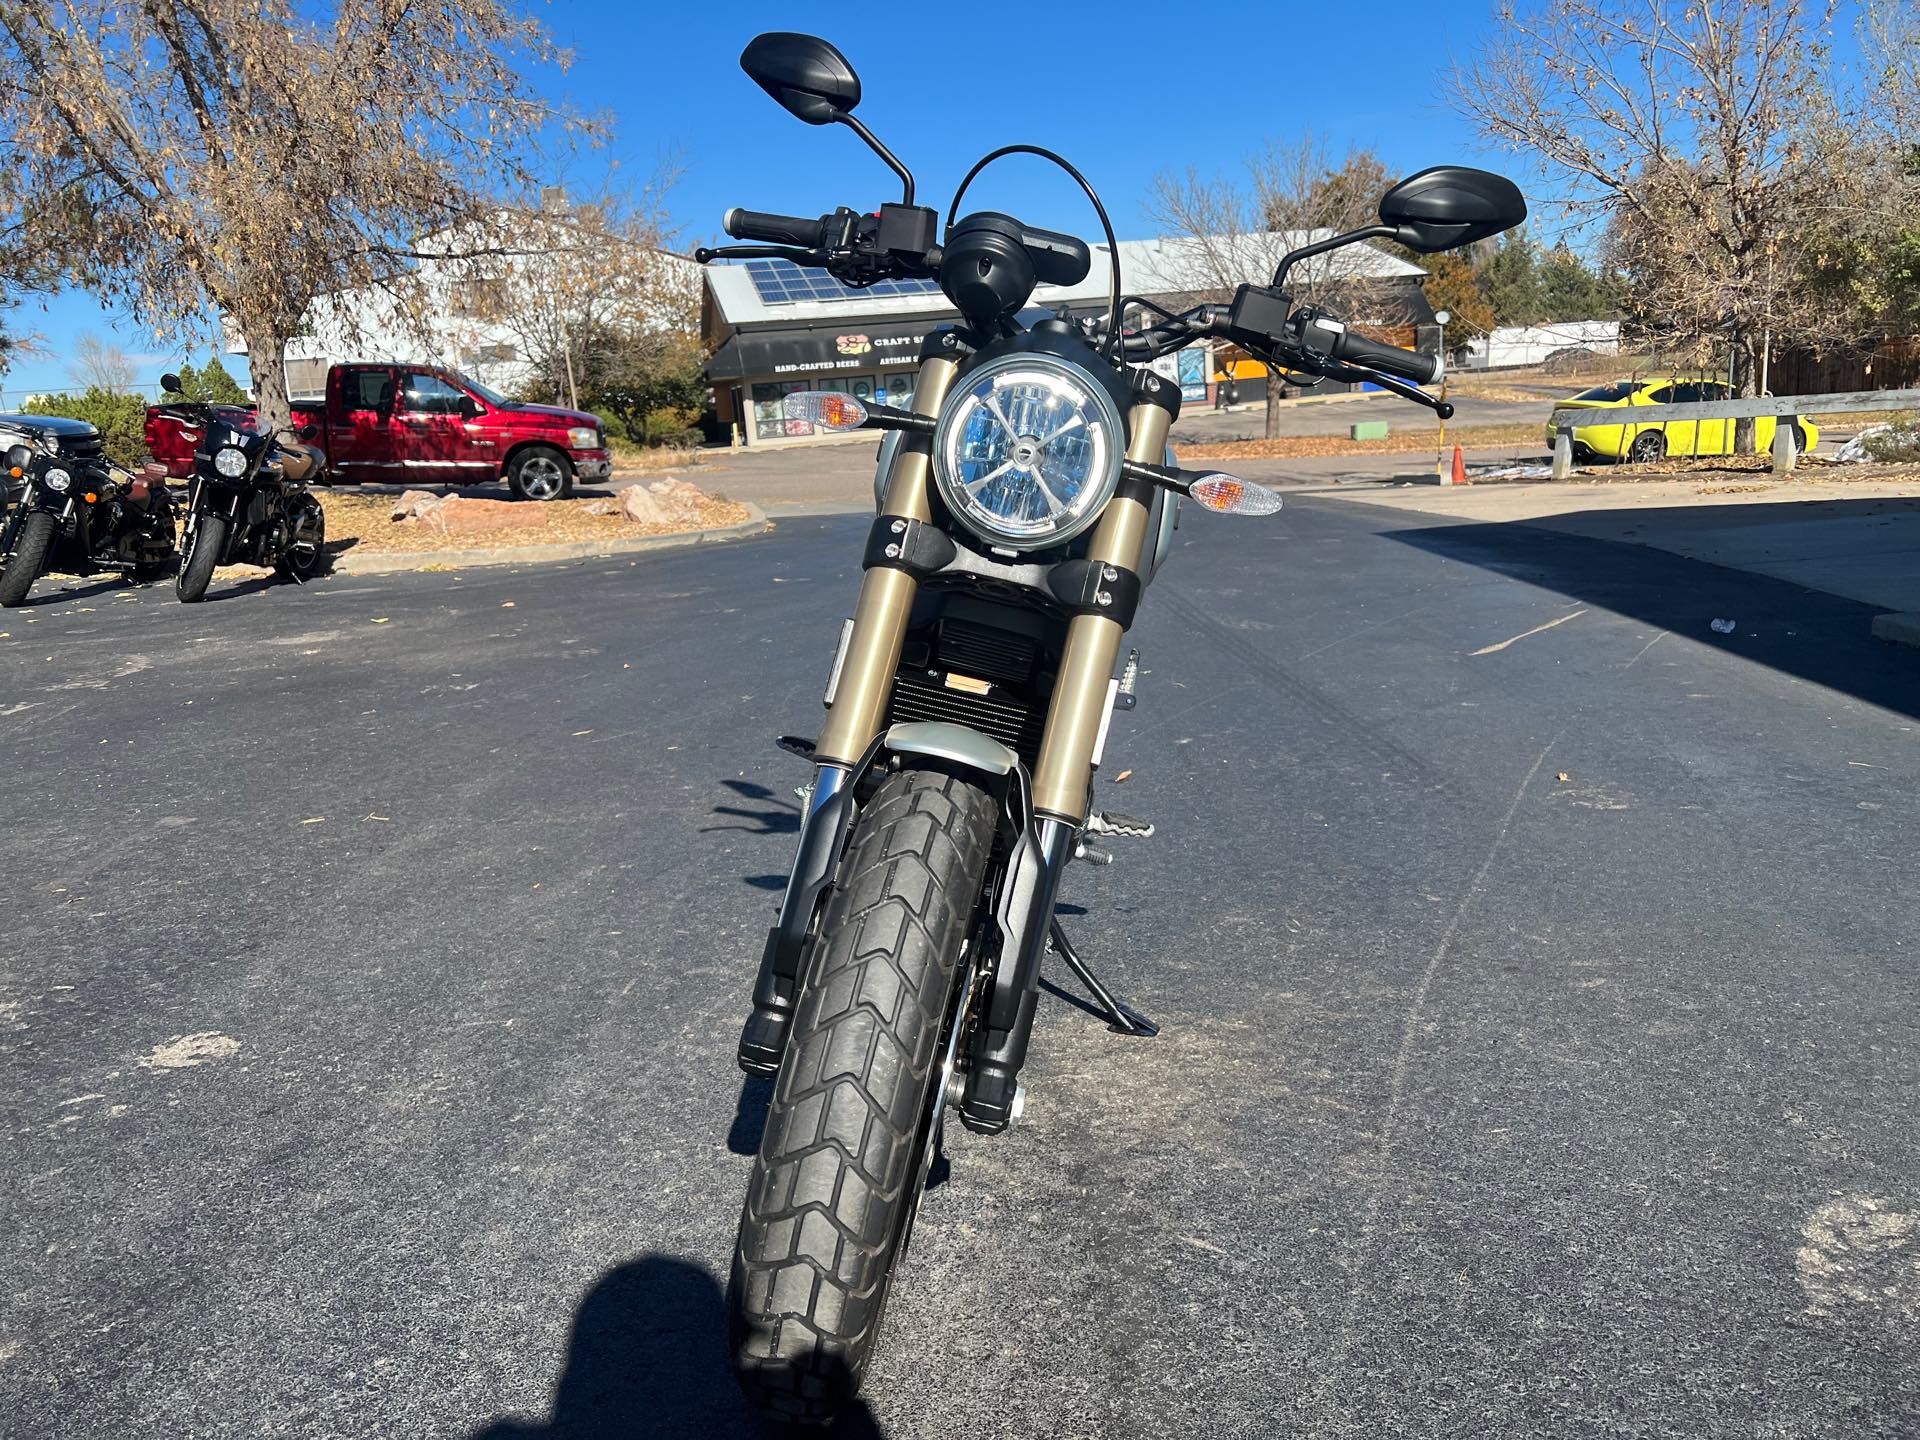 2018 Ducati Scrambler 1100 Special at Aces Motorcycles - Fort Collins